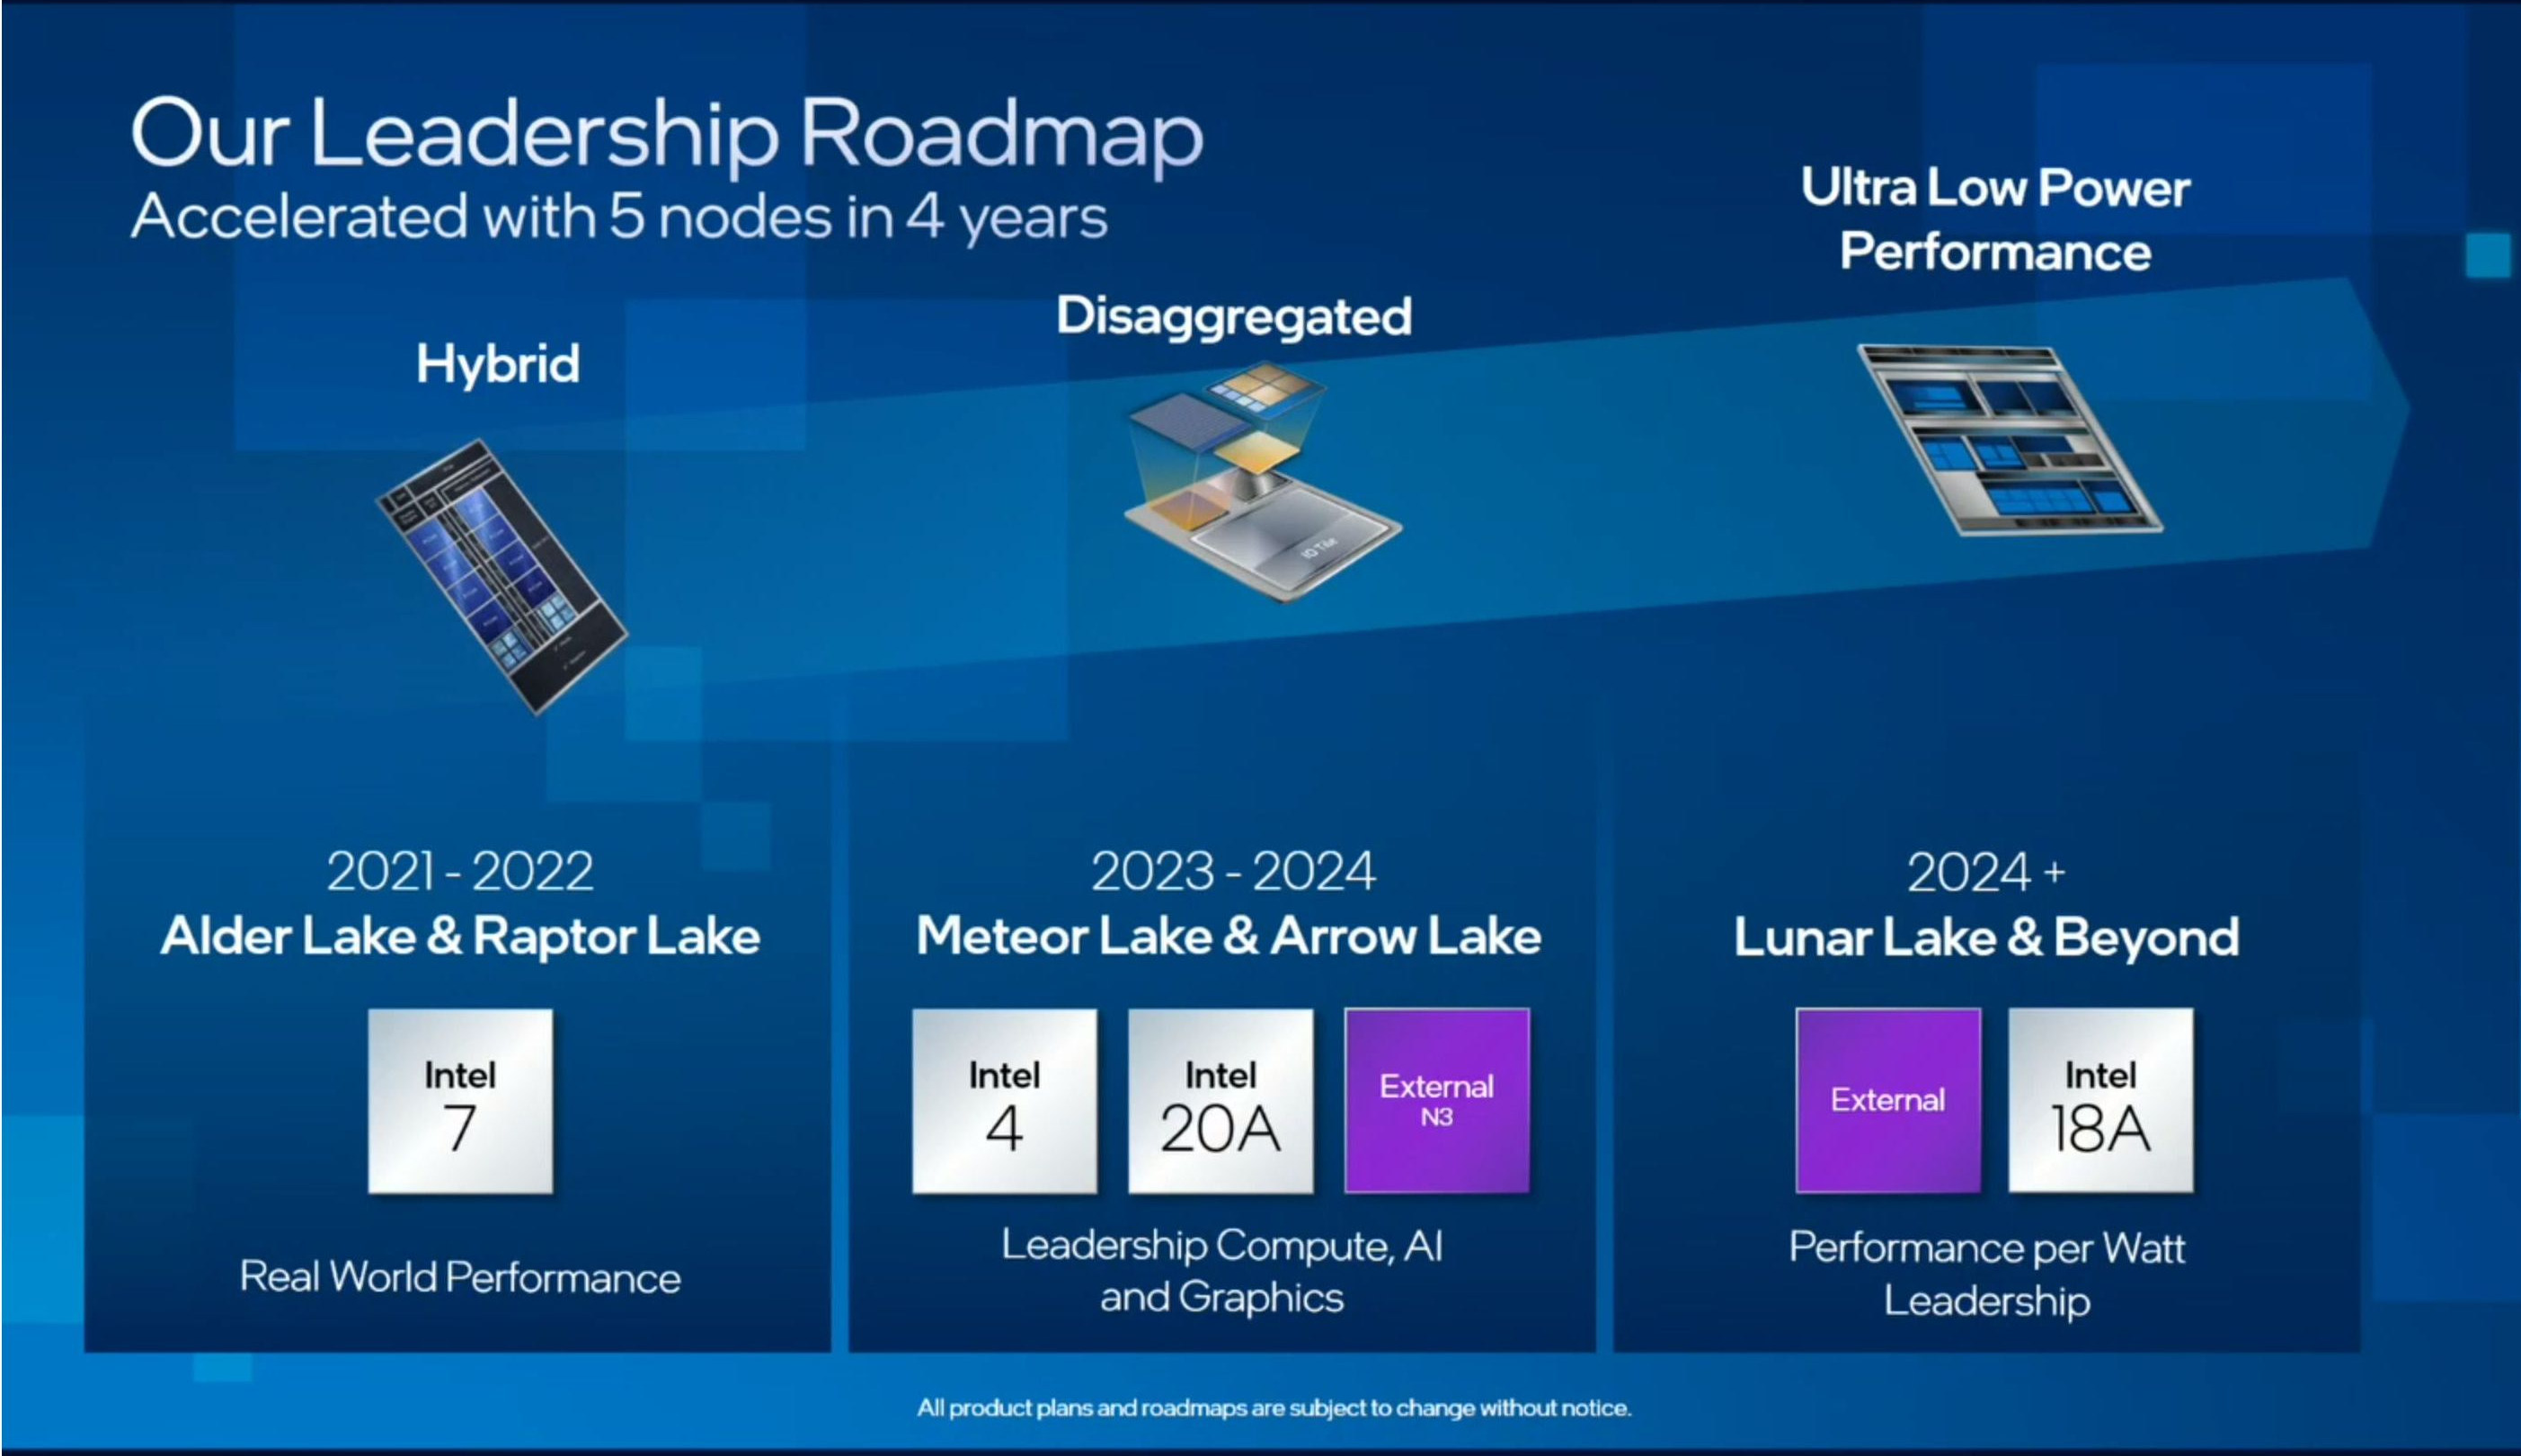 Intel aims to be the performance per watt leader by 2024 with Lunar